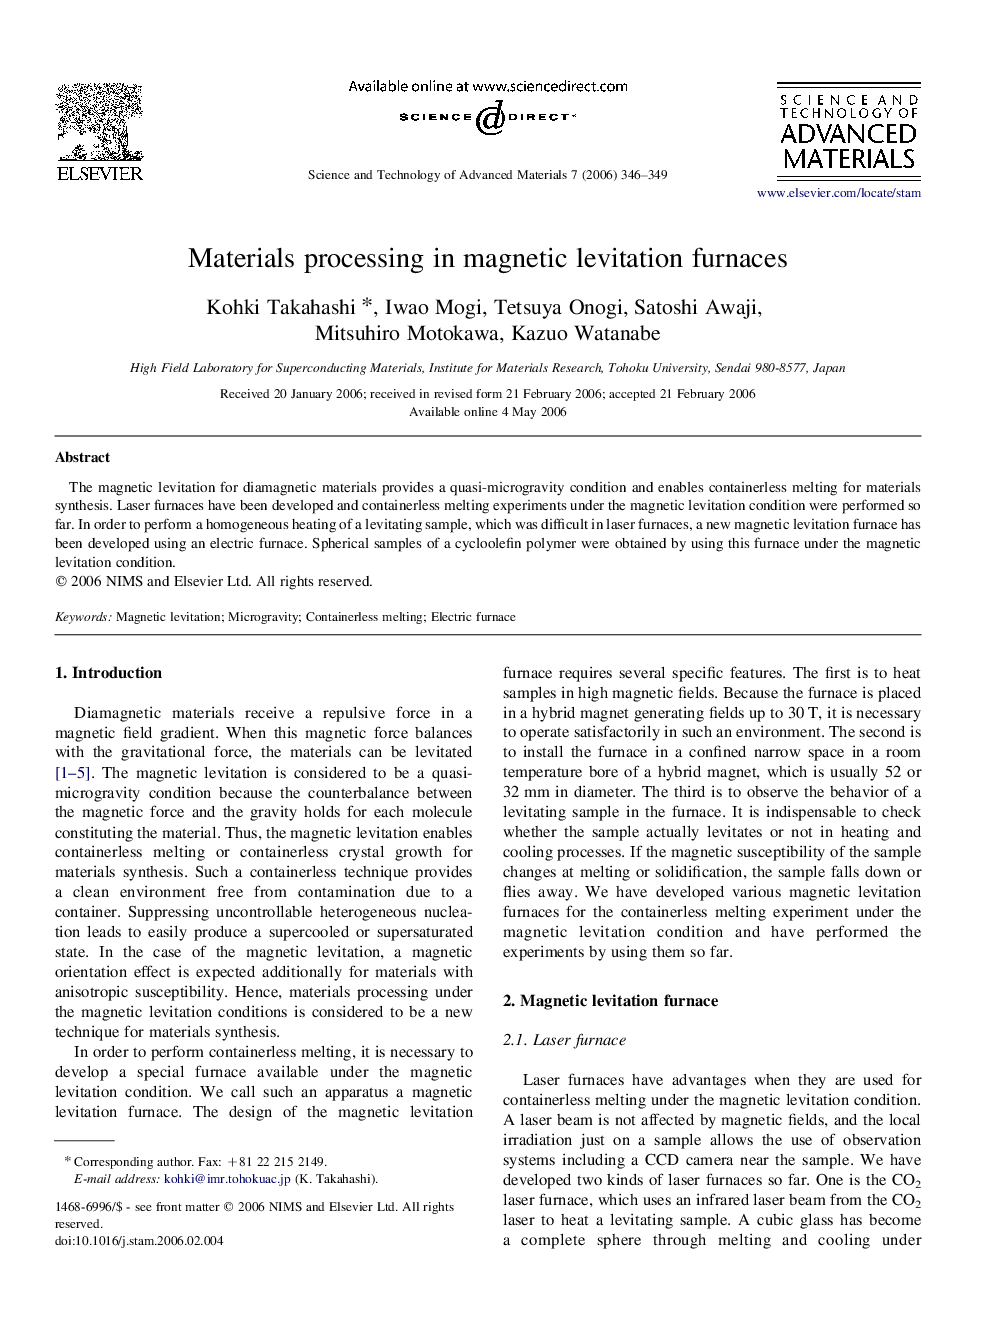 Materials processing in magnetic levitation furnaces